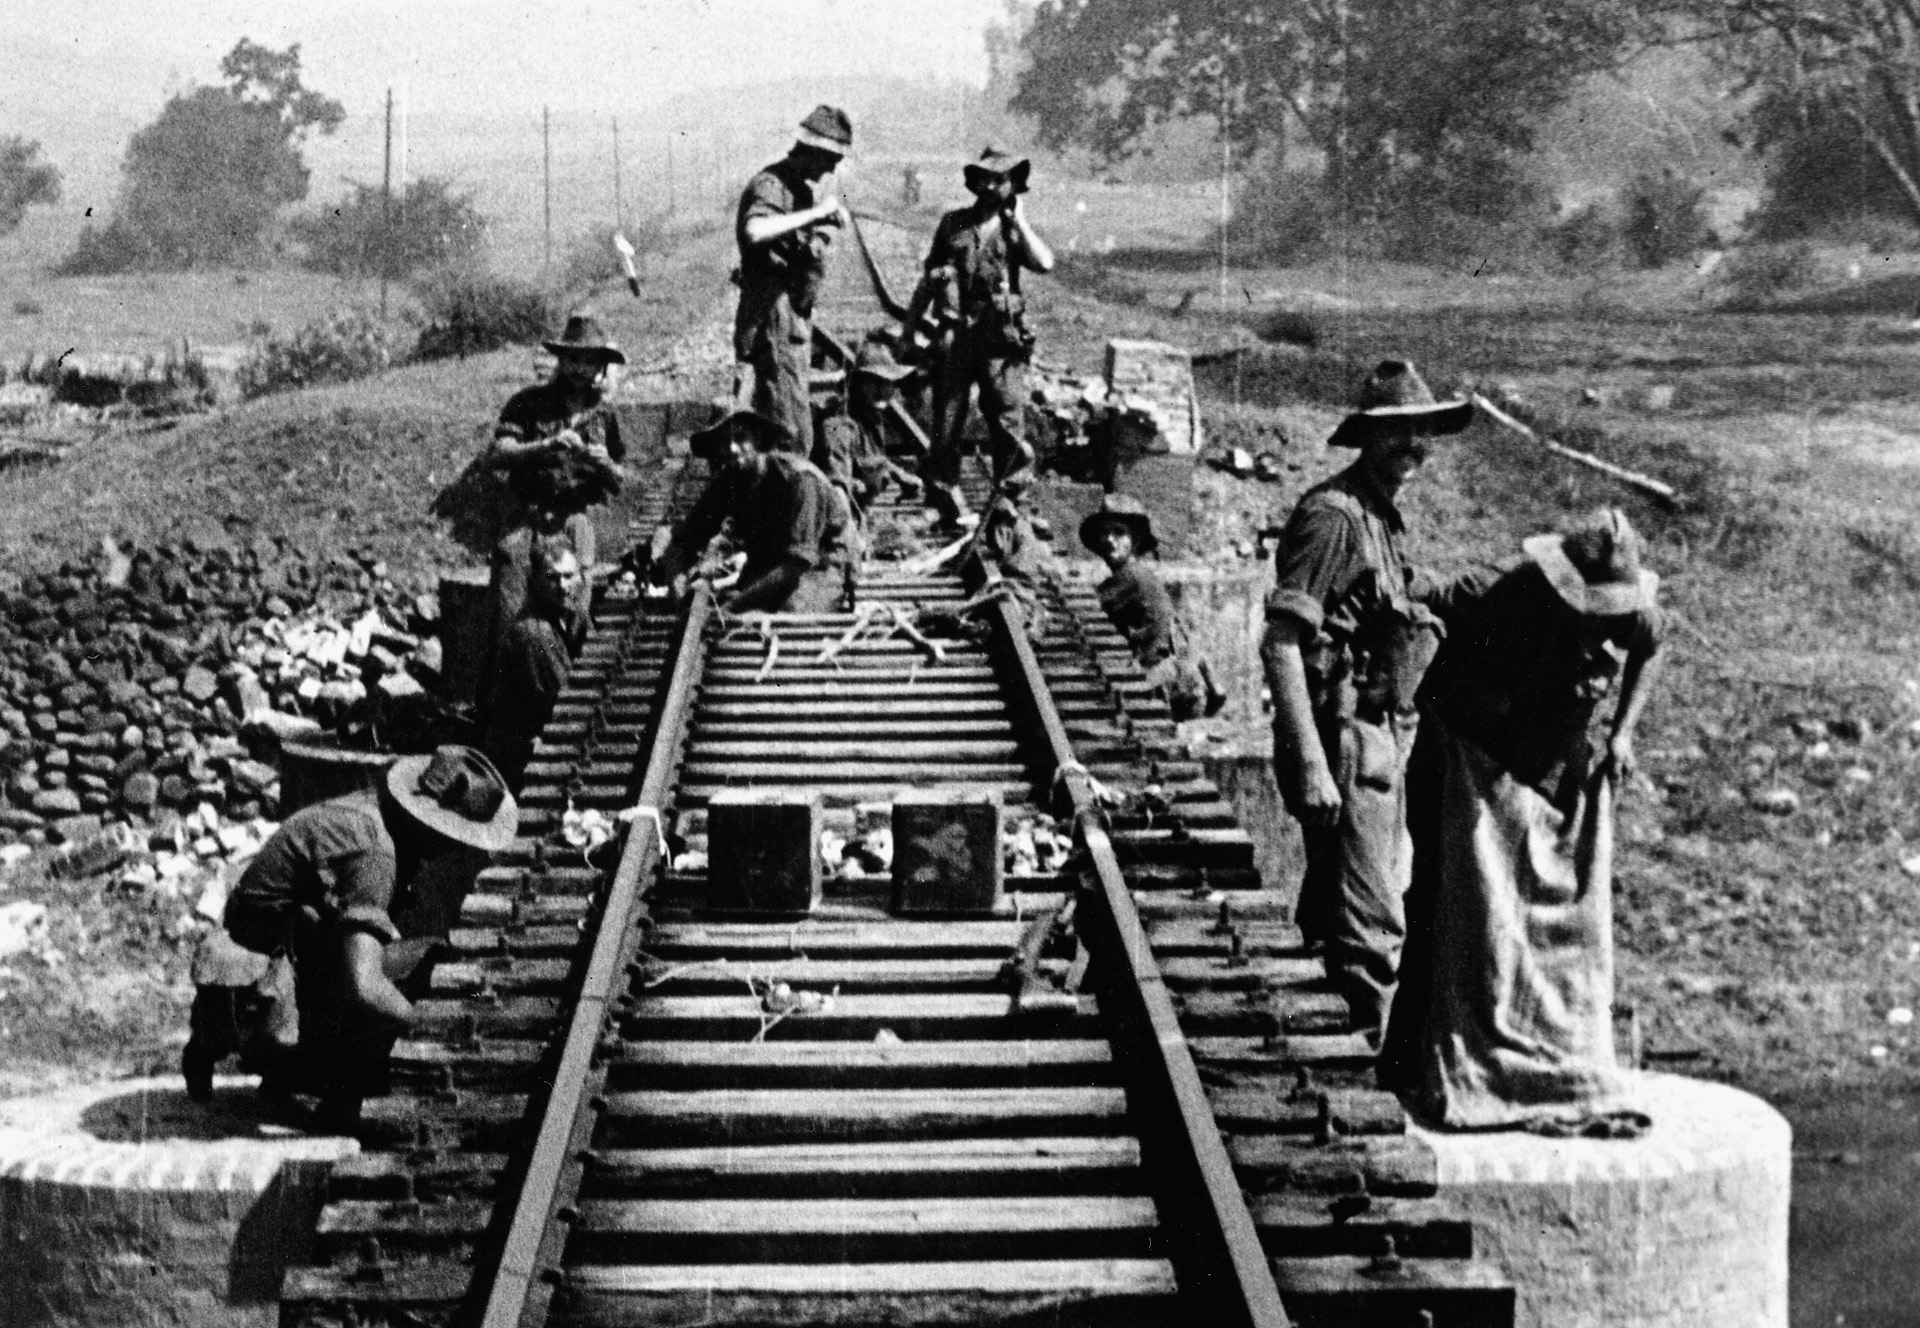 Wearing large-brimmed hats to ward off the tropical sun, engineers of the 77 Brigade wire a section of railroad track with explosives.